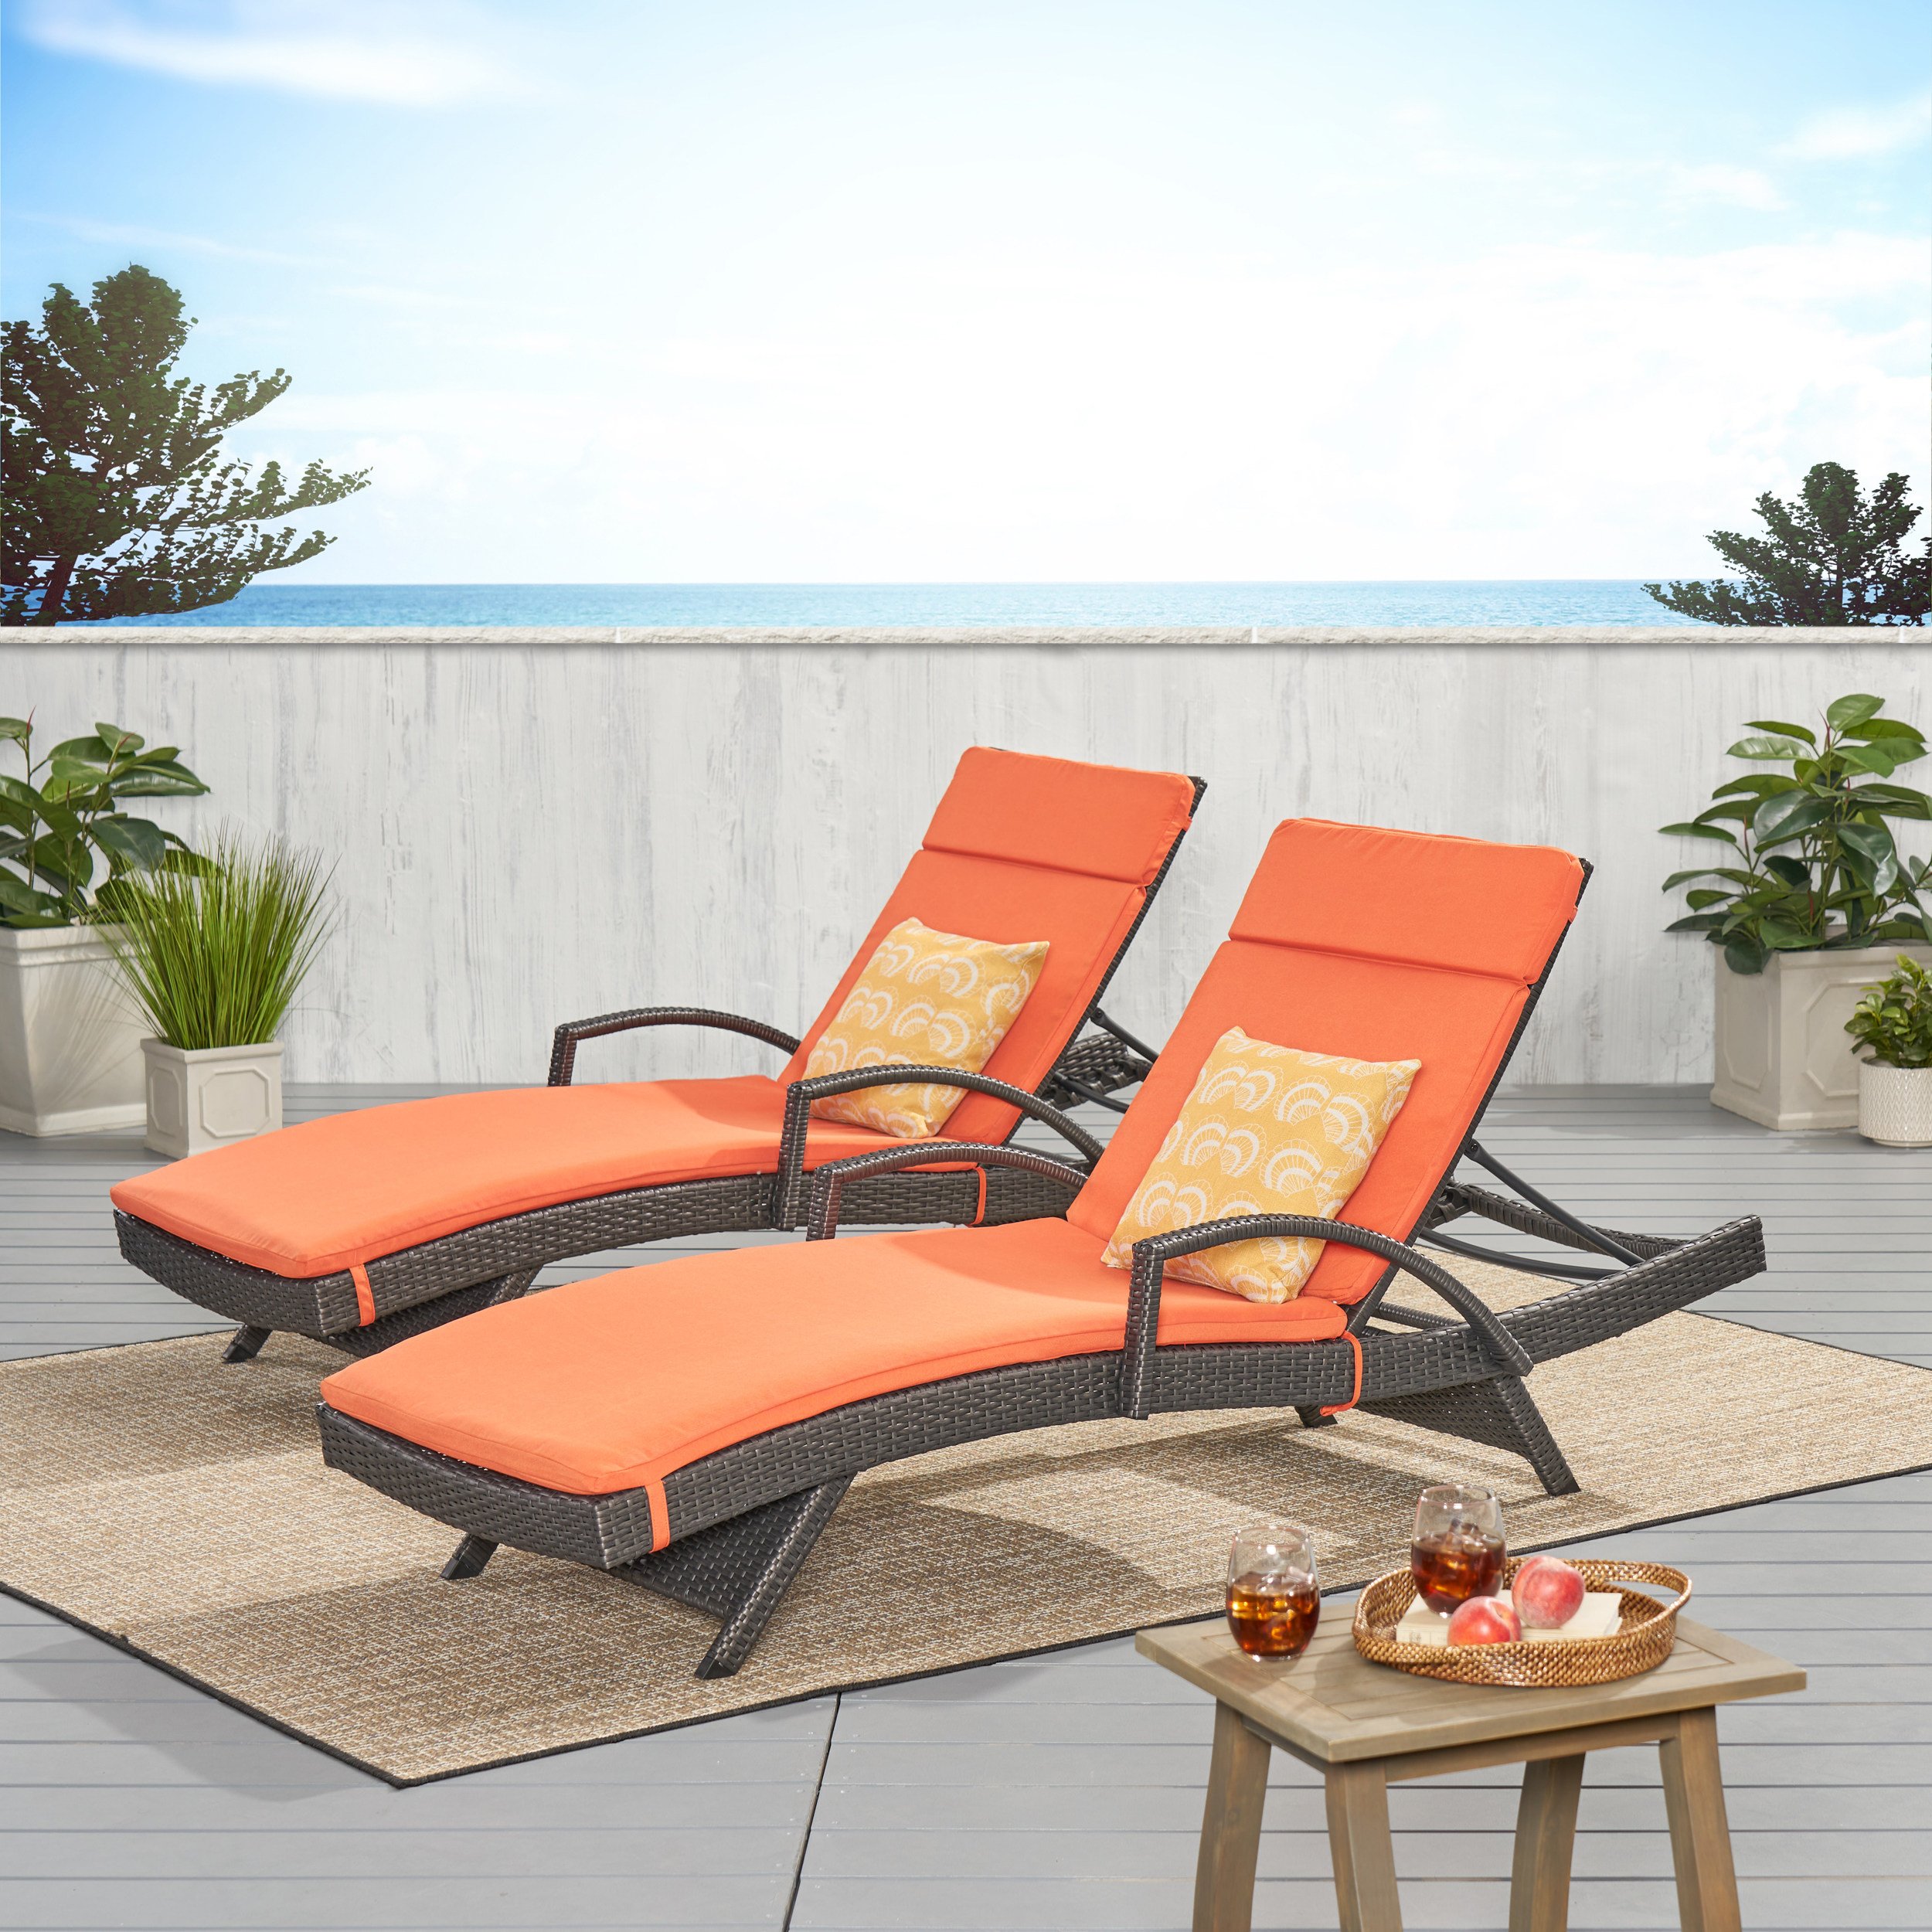 Soleil Outdoor Wicker Chaise Lounges With Water Resistant Cushions (Set Of 2) - Beige